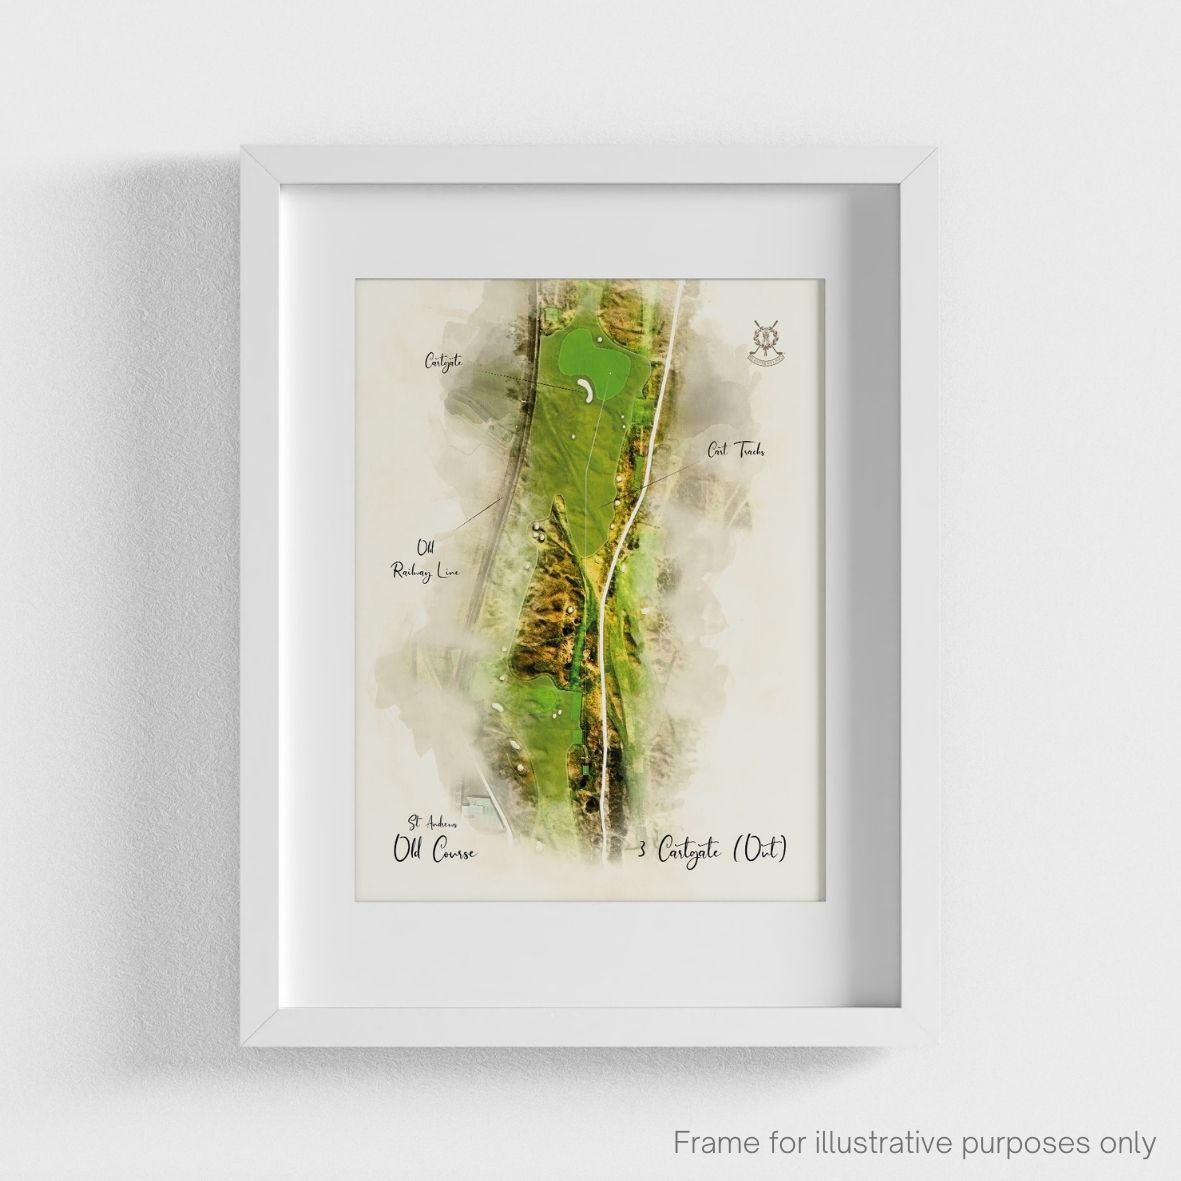 St Andrews Hole 3 WaterMap Print shown in a white frame